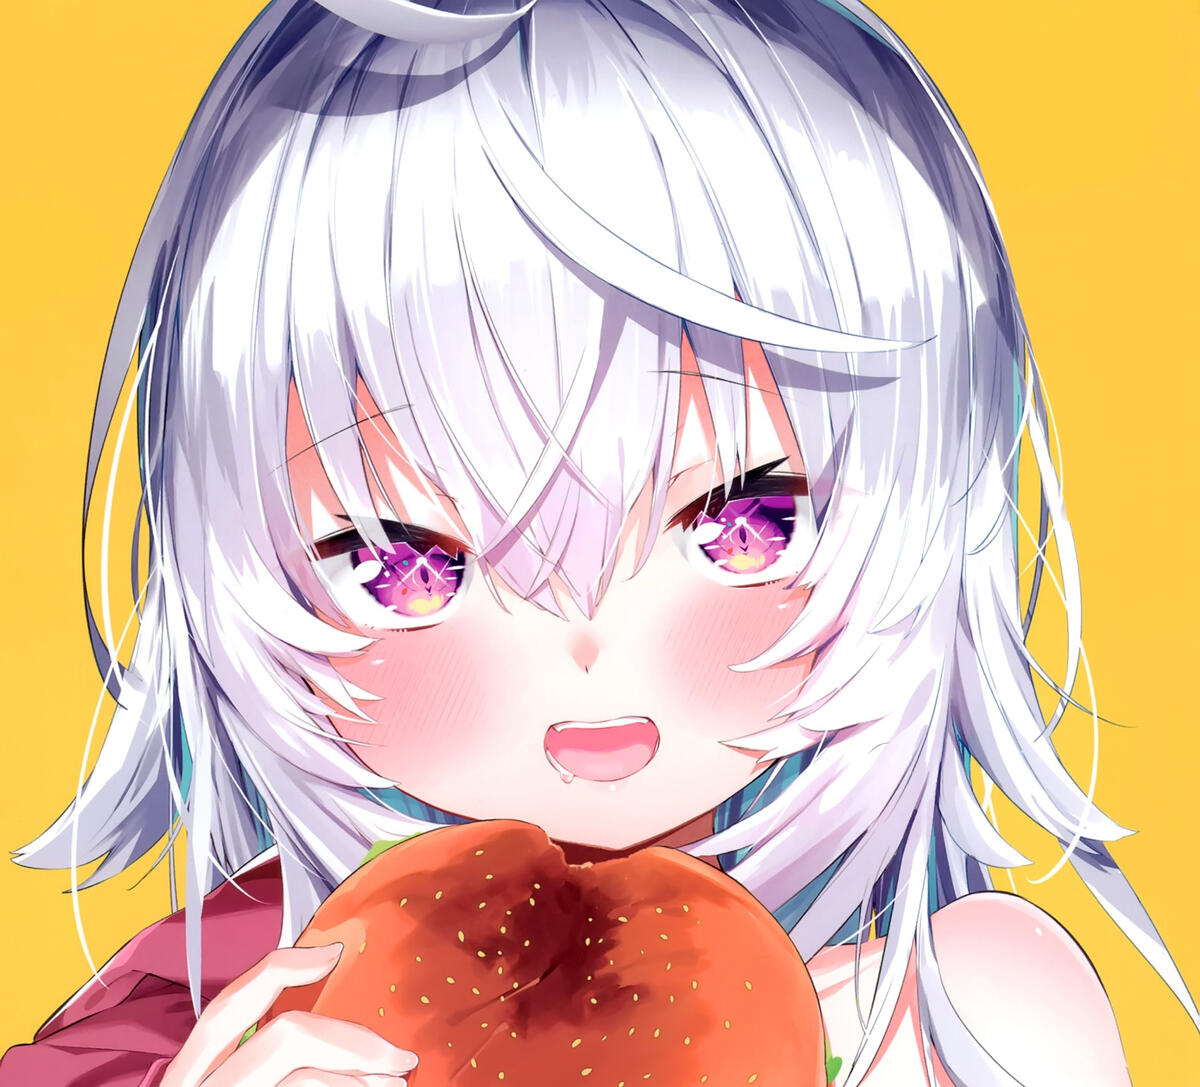 Anime Girl Eating Bread on Yellow Background